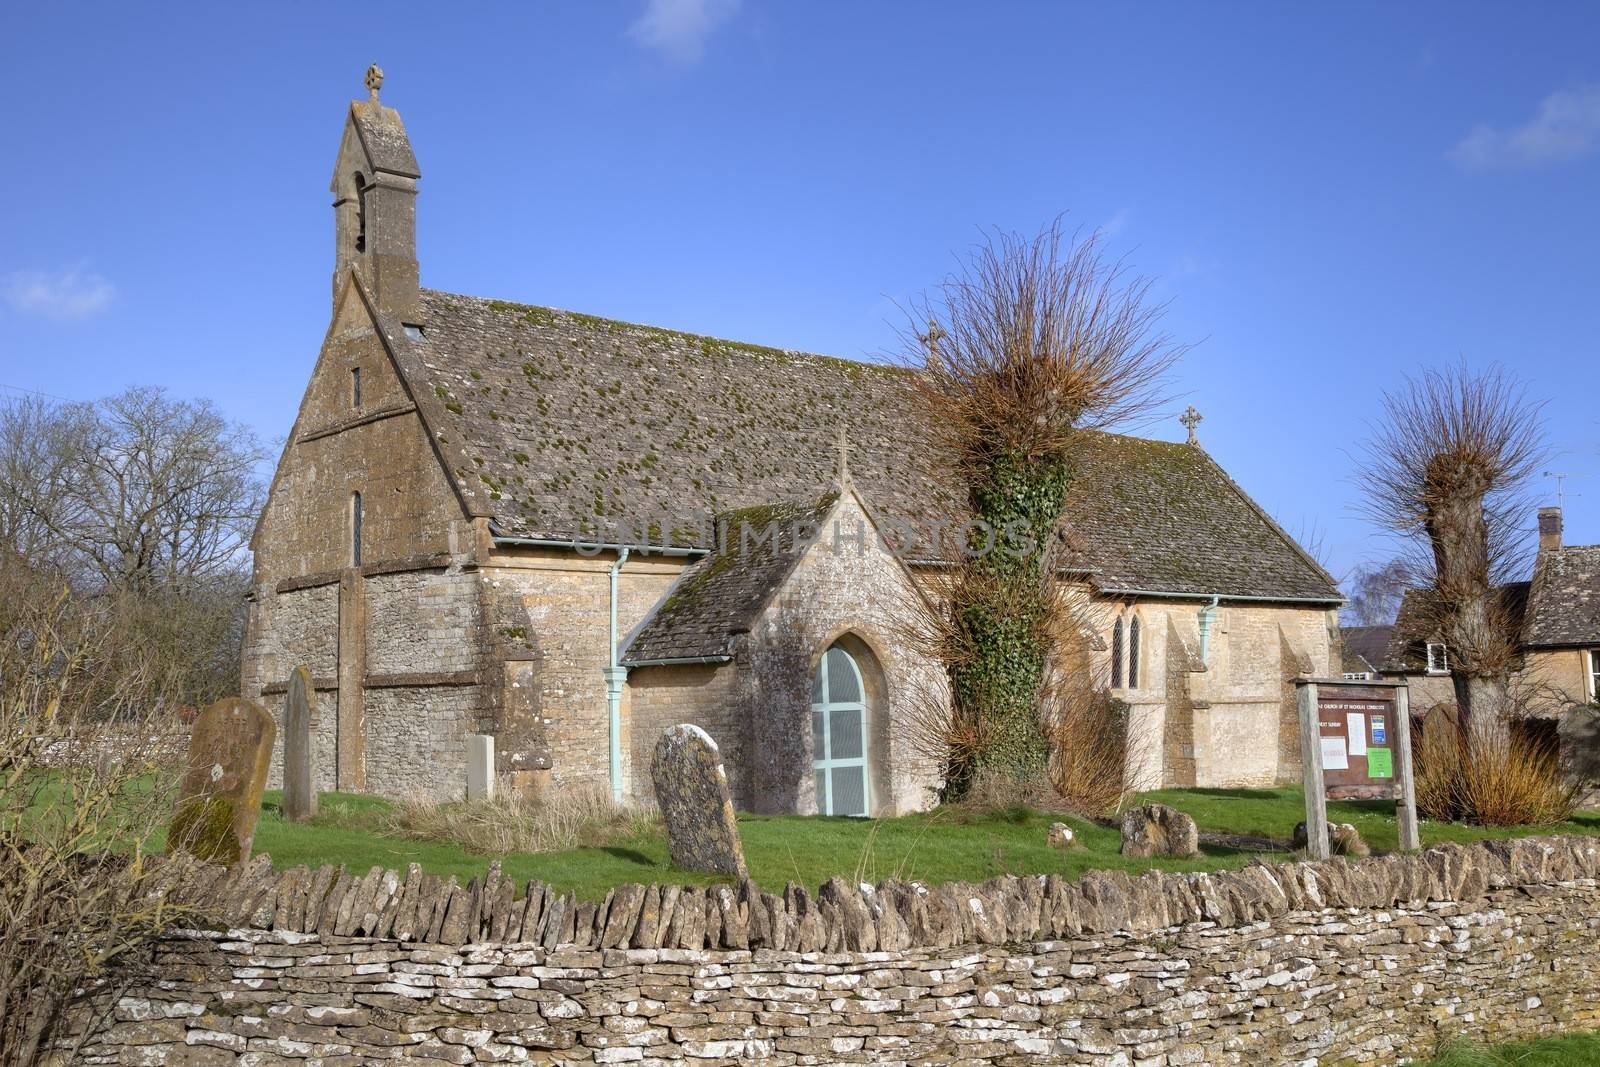 The small Cotswold chapel at Condicote, Gloucestershire, England.